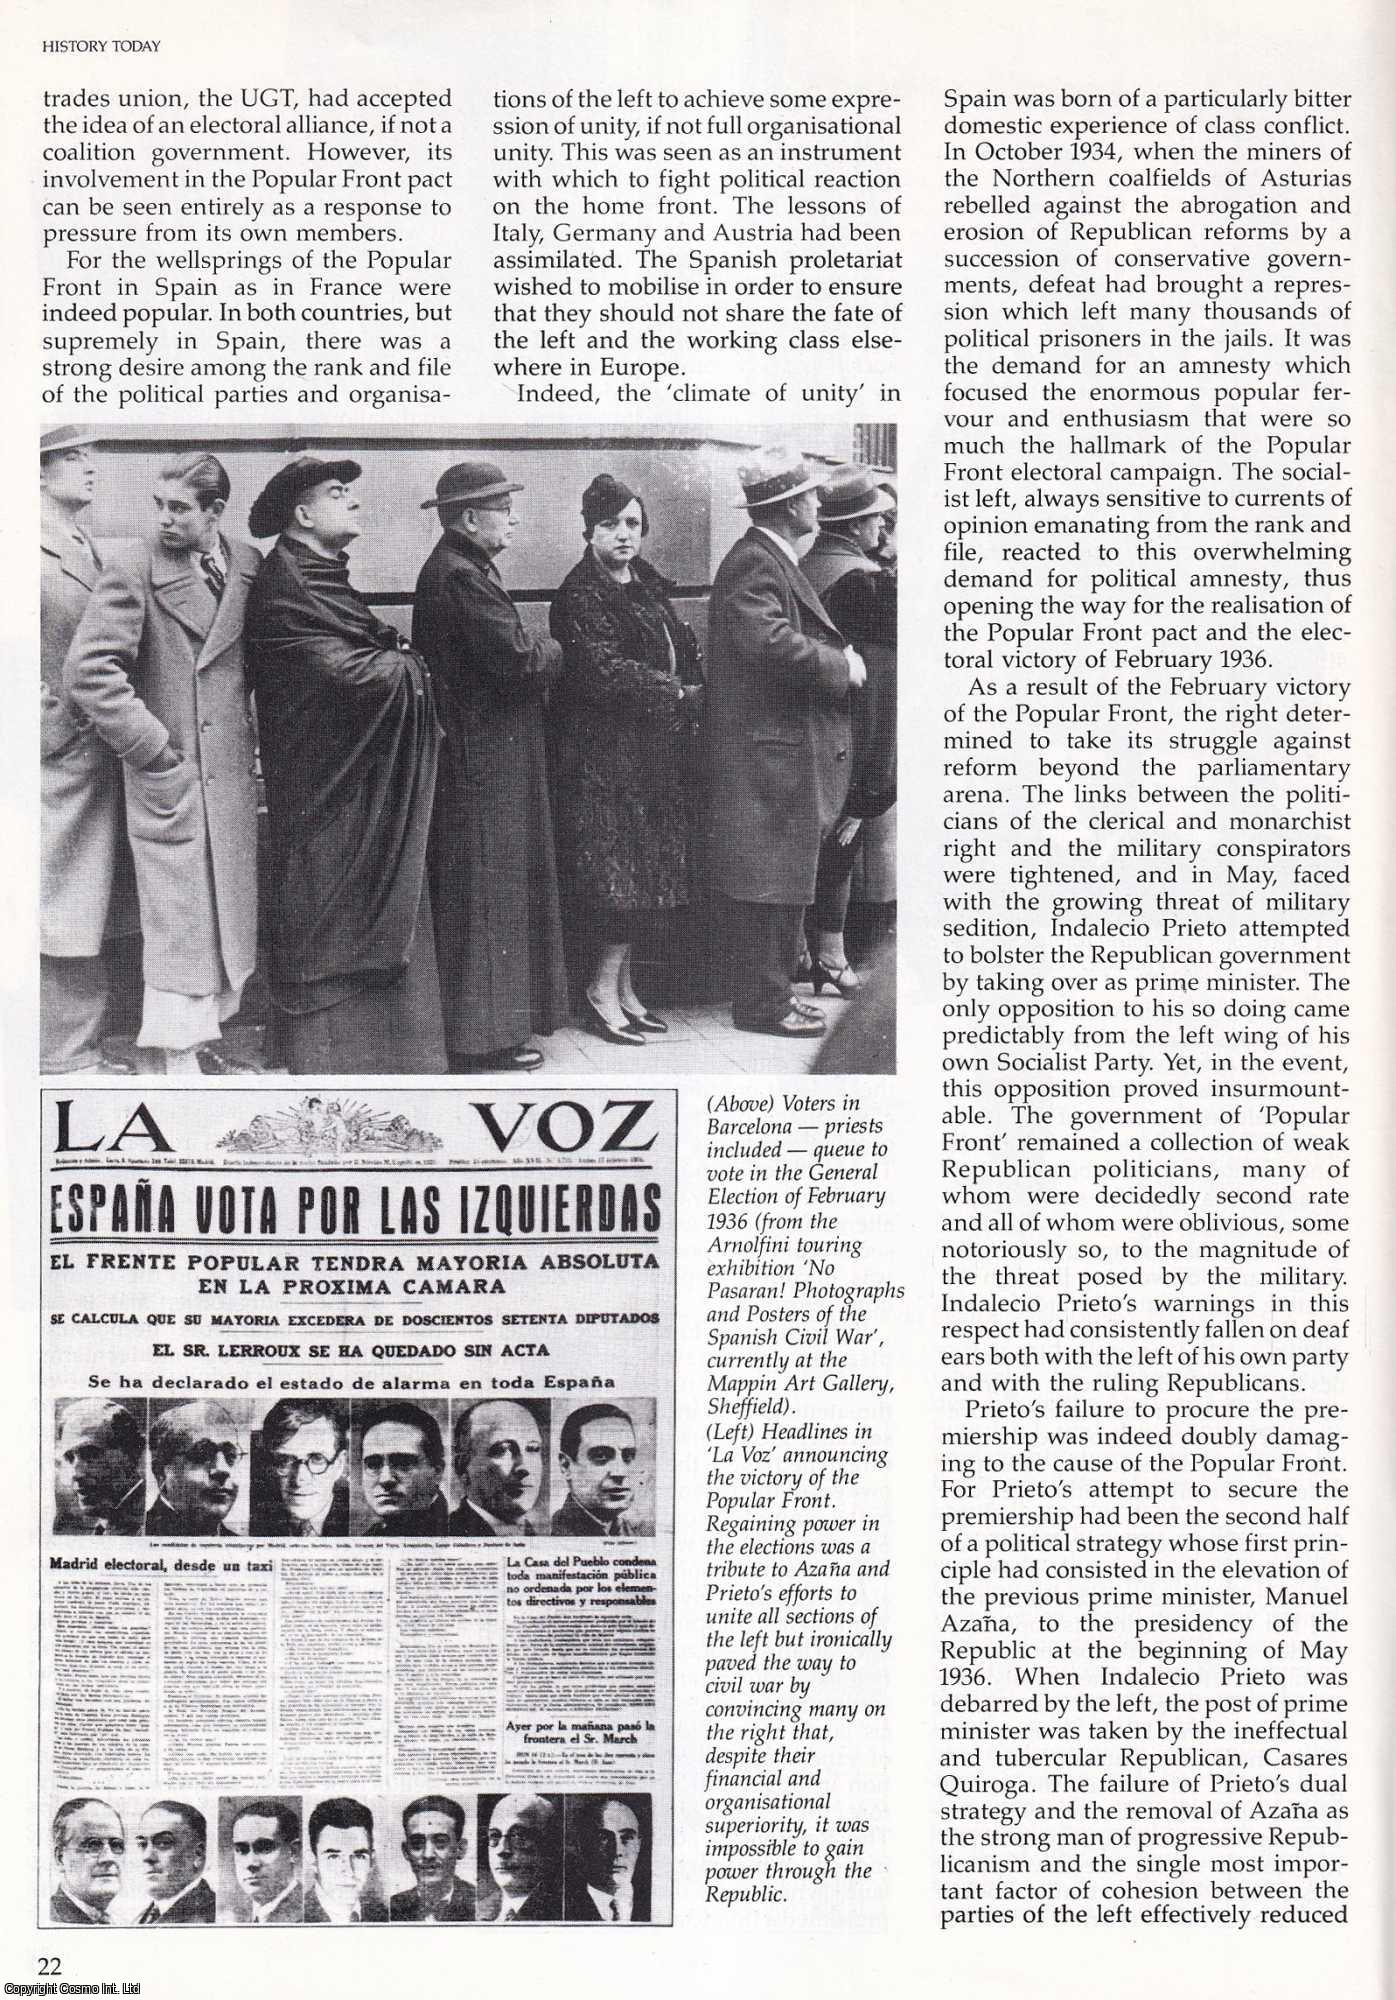 Helen Graham - Spain - The Road to a Popular Front. An original article from History Today, 1986.